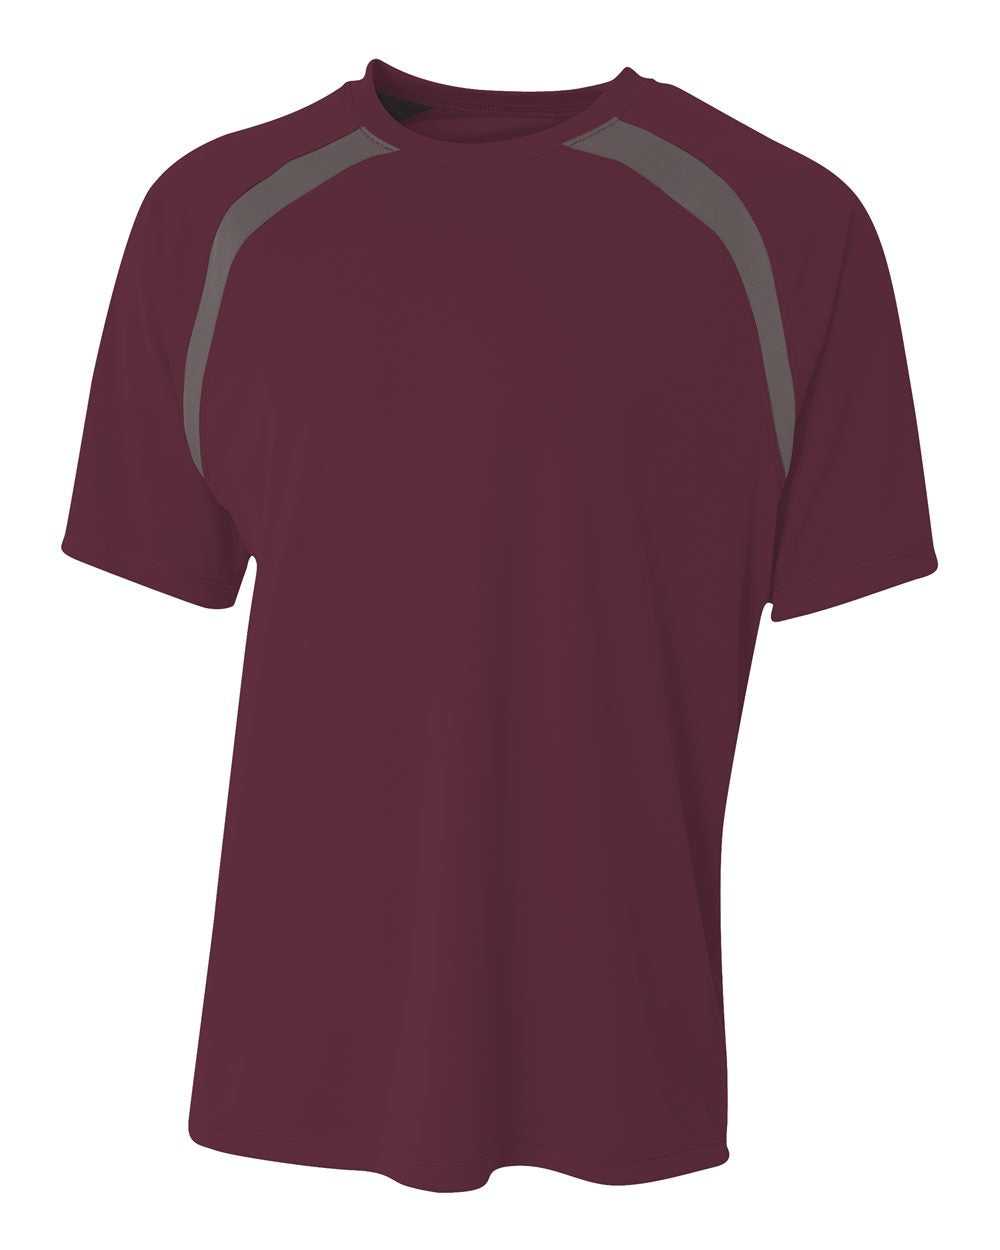 A4 NB3001 Youth Spartan Short Sleeve Color Block Crew - Maroon Graphite - HIT a Double